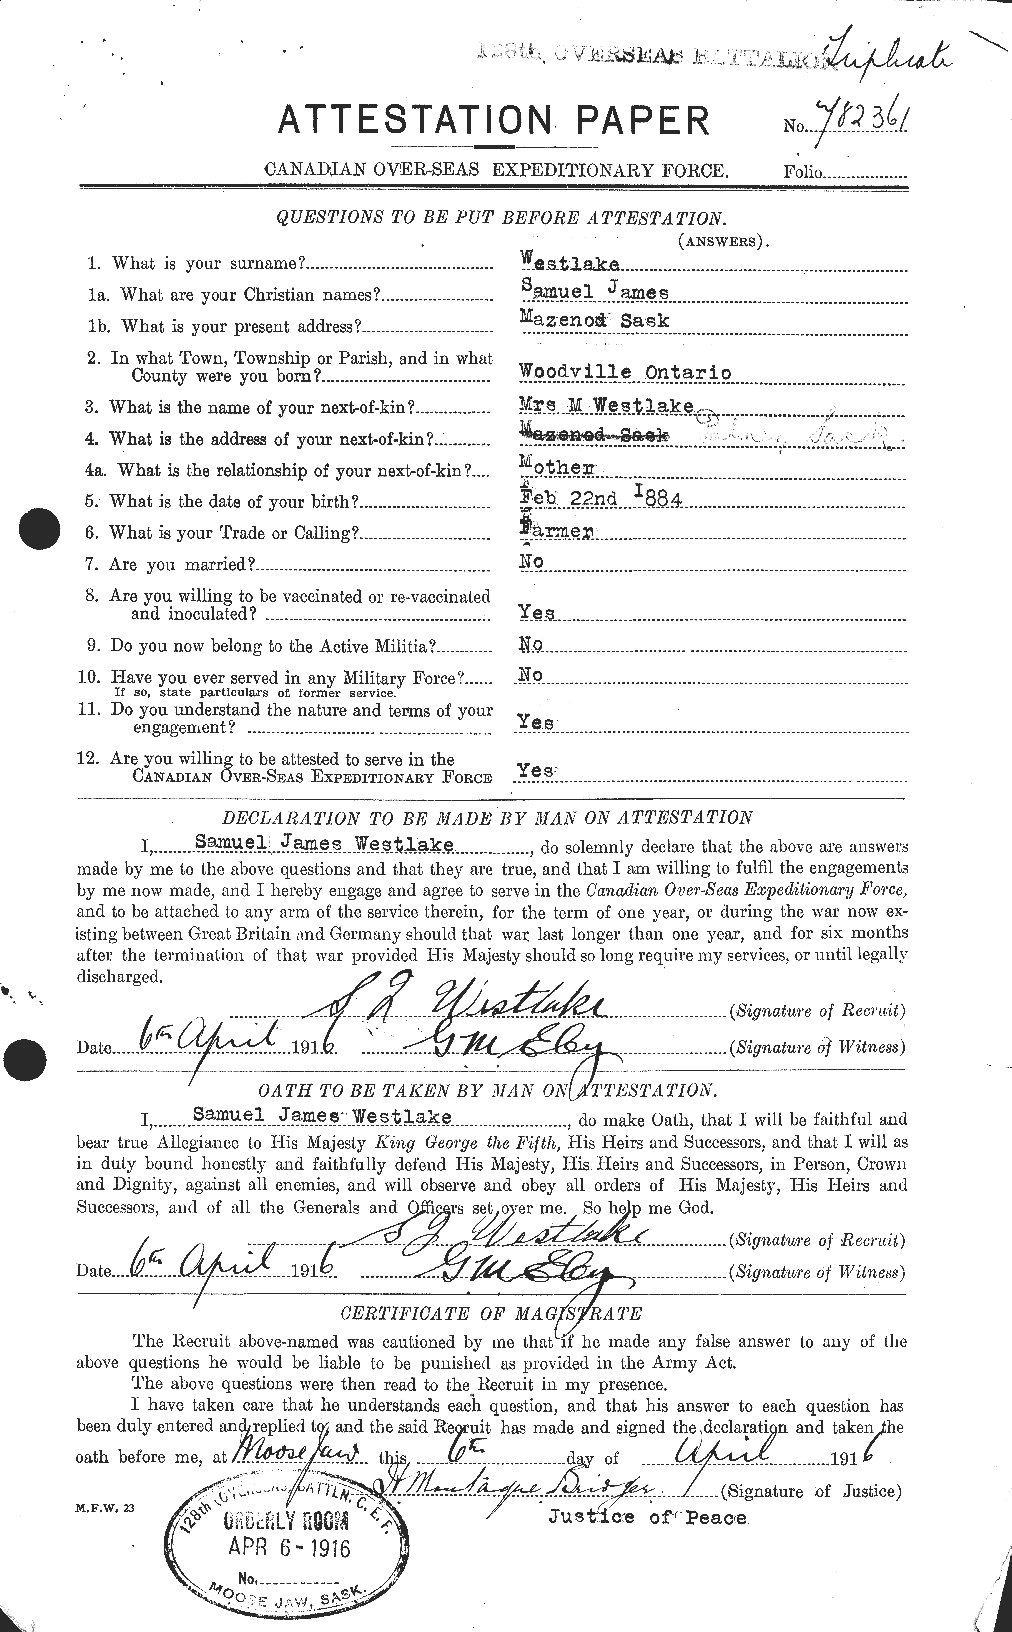 Personnel Records of the First World War - CEF 665616a